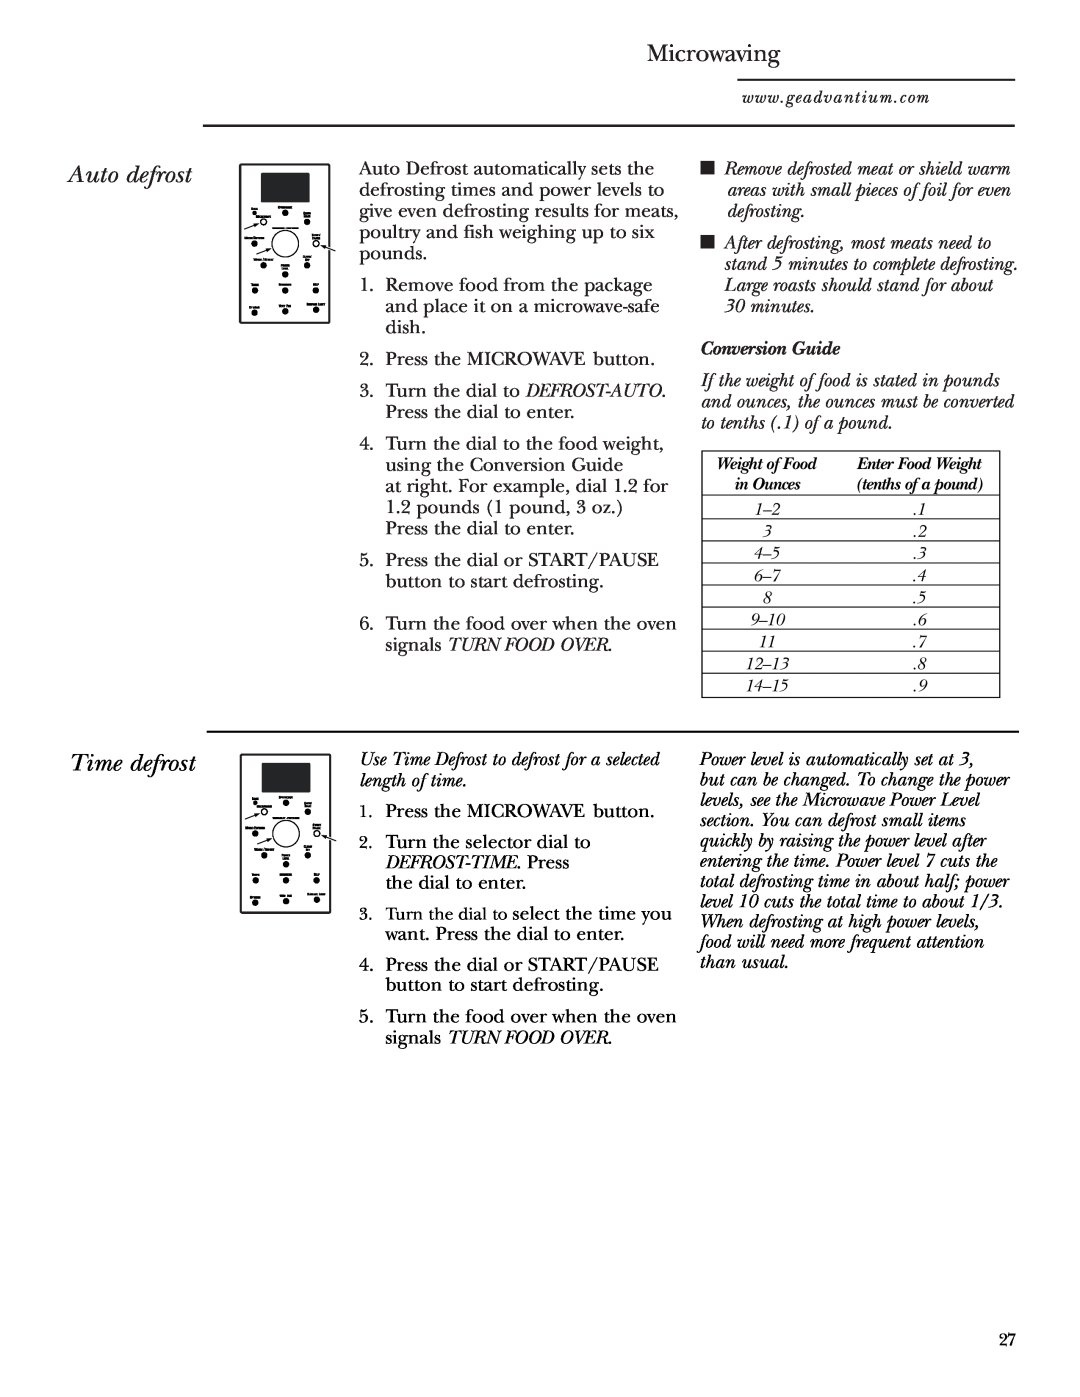 GE SCA1001, SCA1000 owner manual Auto defrost, Time defrost, Microwaving, Conversion Guide 